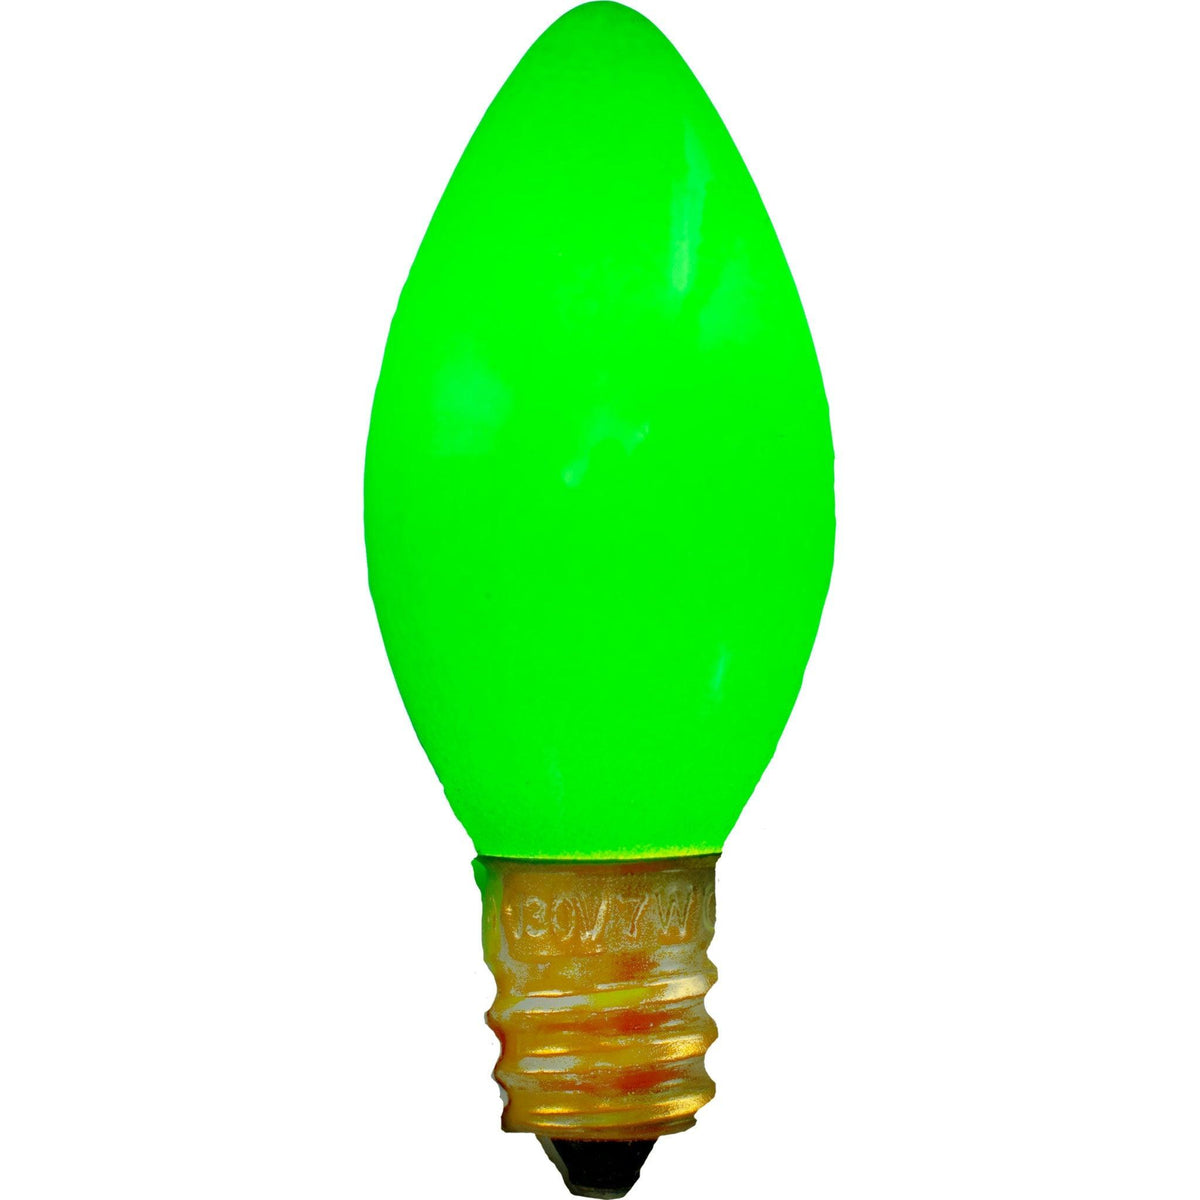 C-7 & C-9 Solid Ceramic Green Christmas Light Bulbs.  Replace your old bulbs with a set of brand new Candelabra Green Lights on sale leedisplay.com